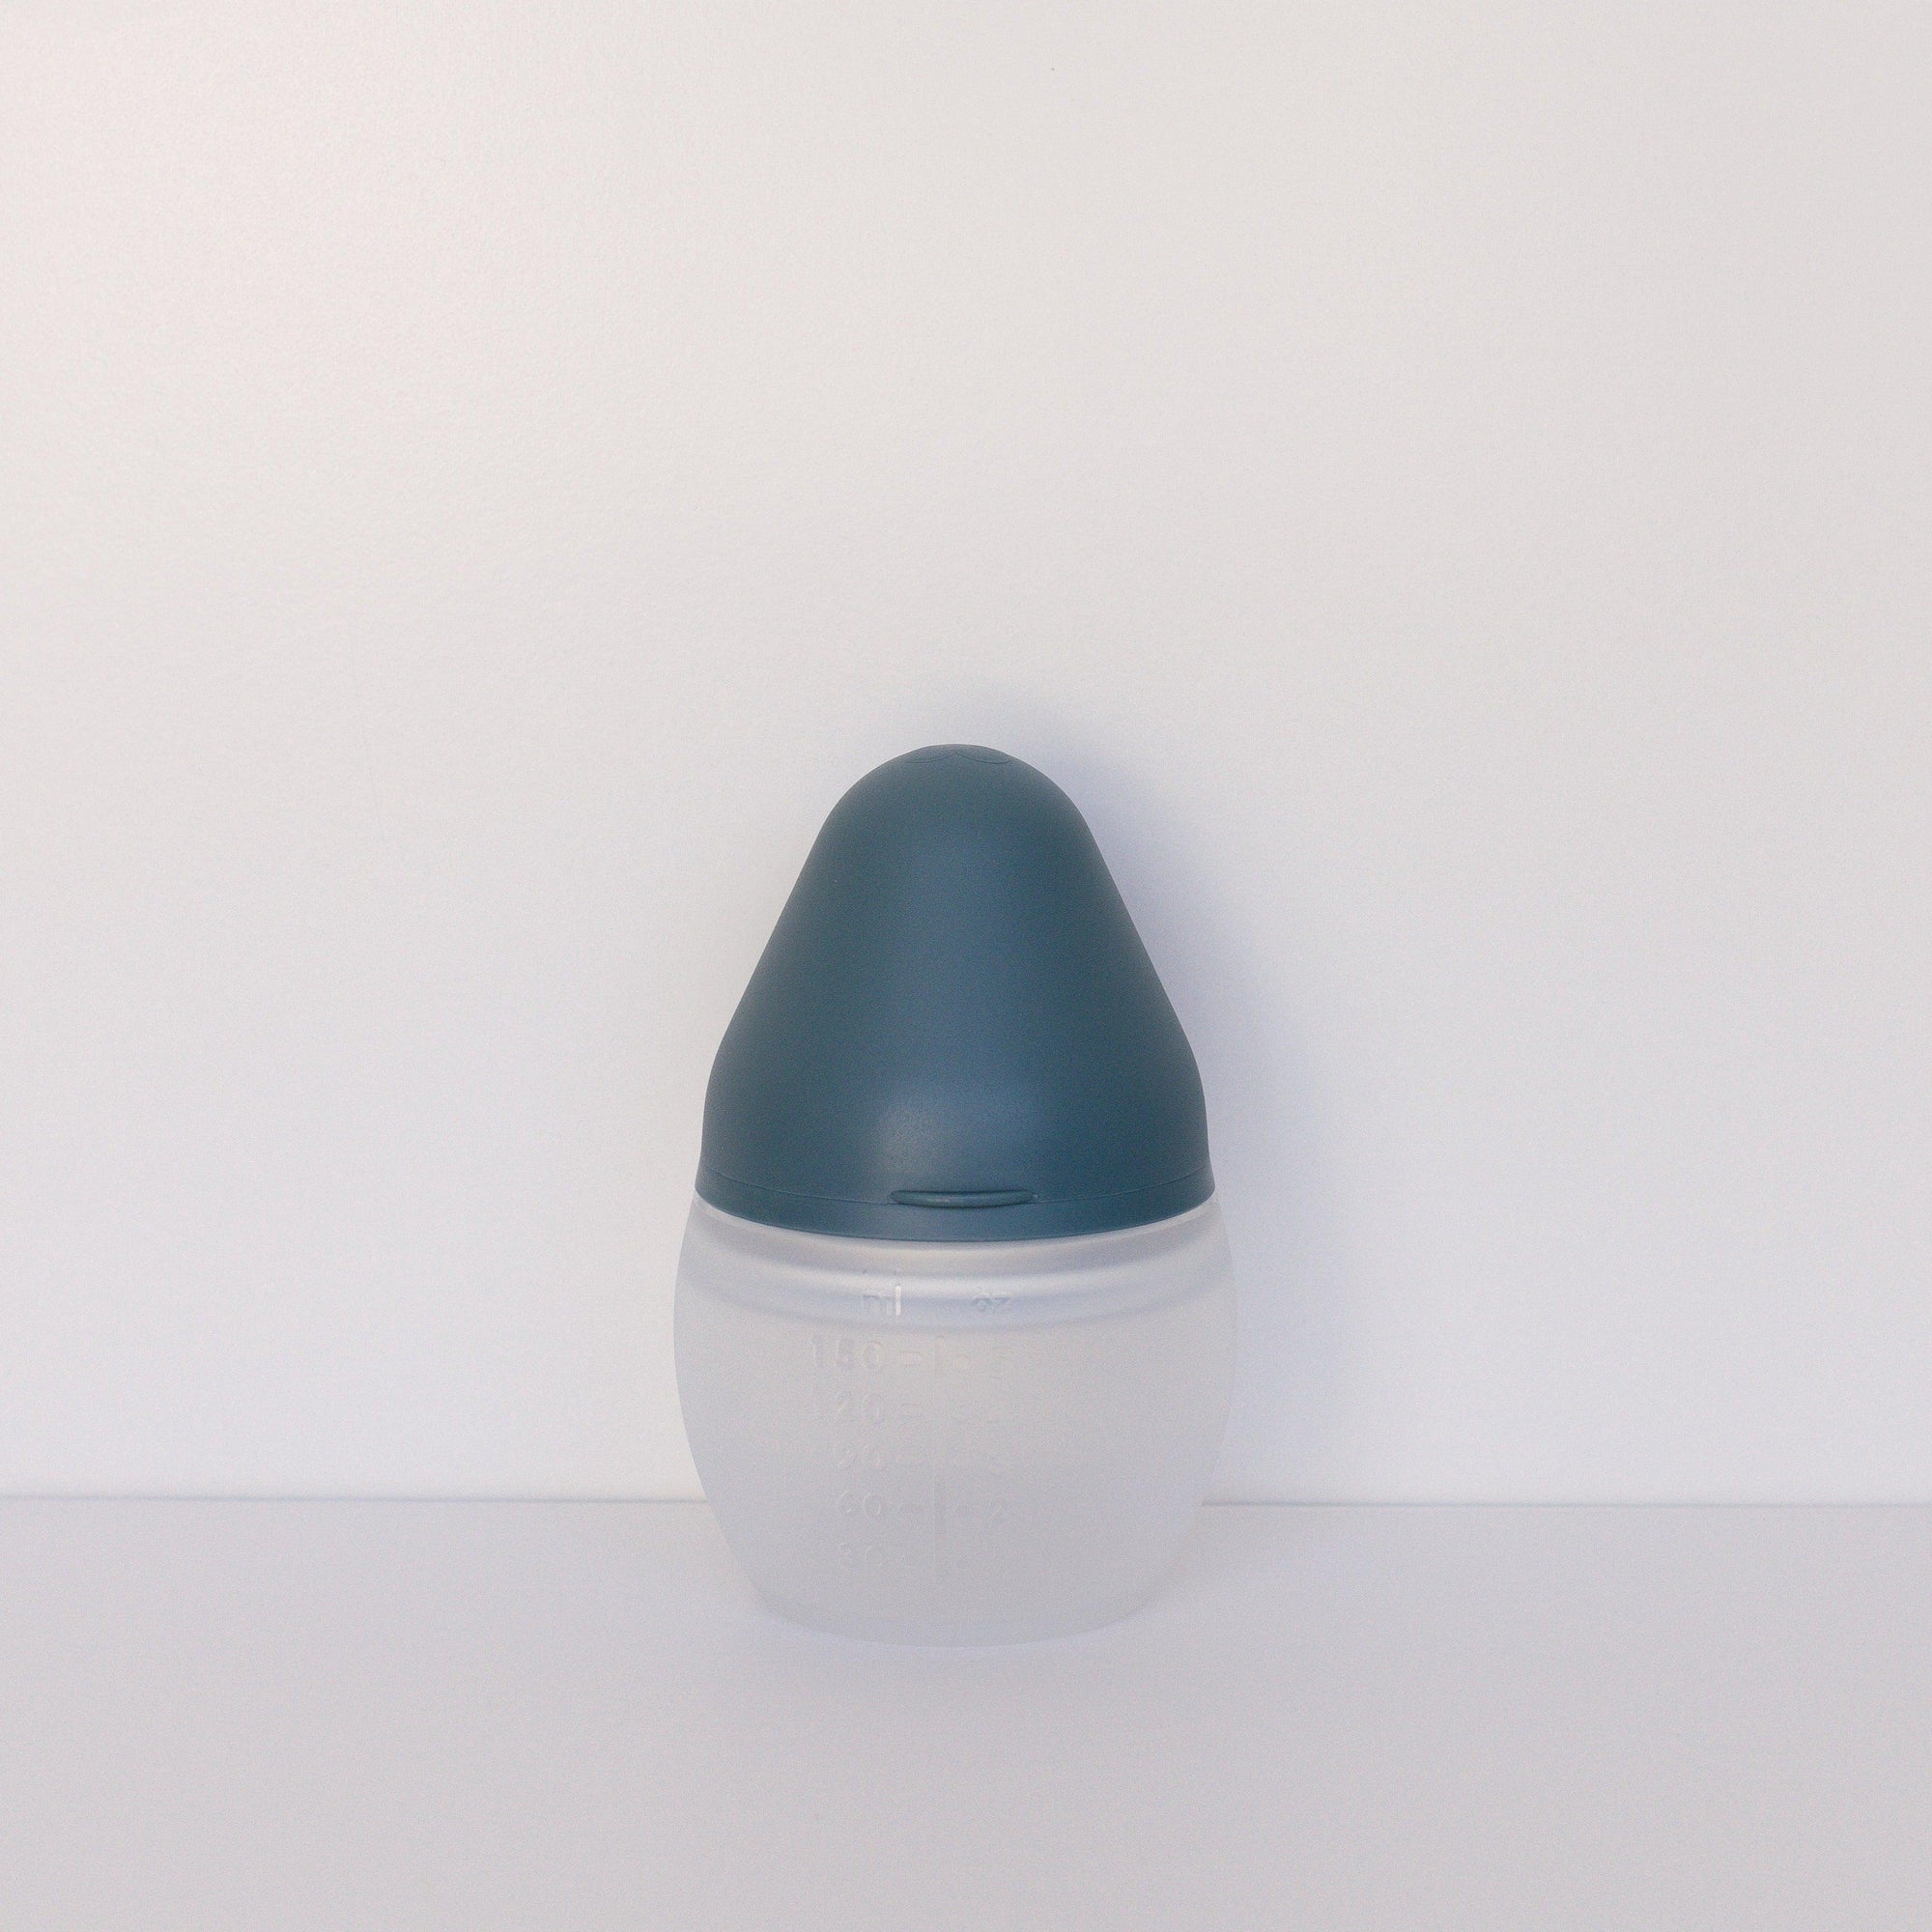 An Elhée France BibRond | blue grey baby bottle sitting on a white surface.